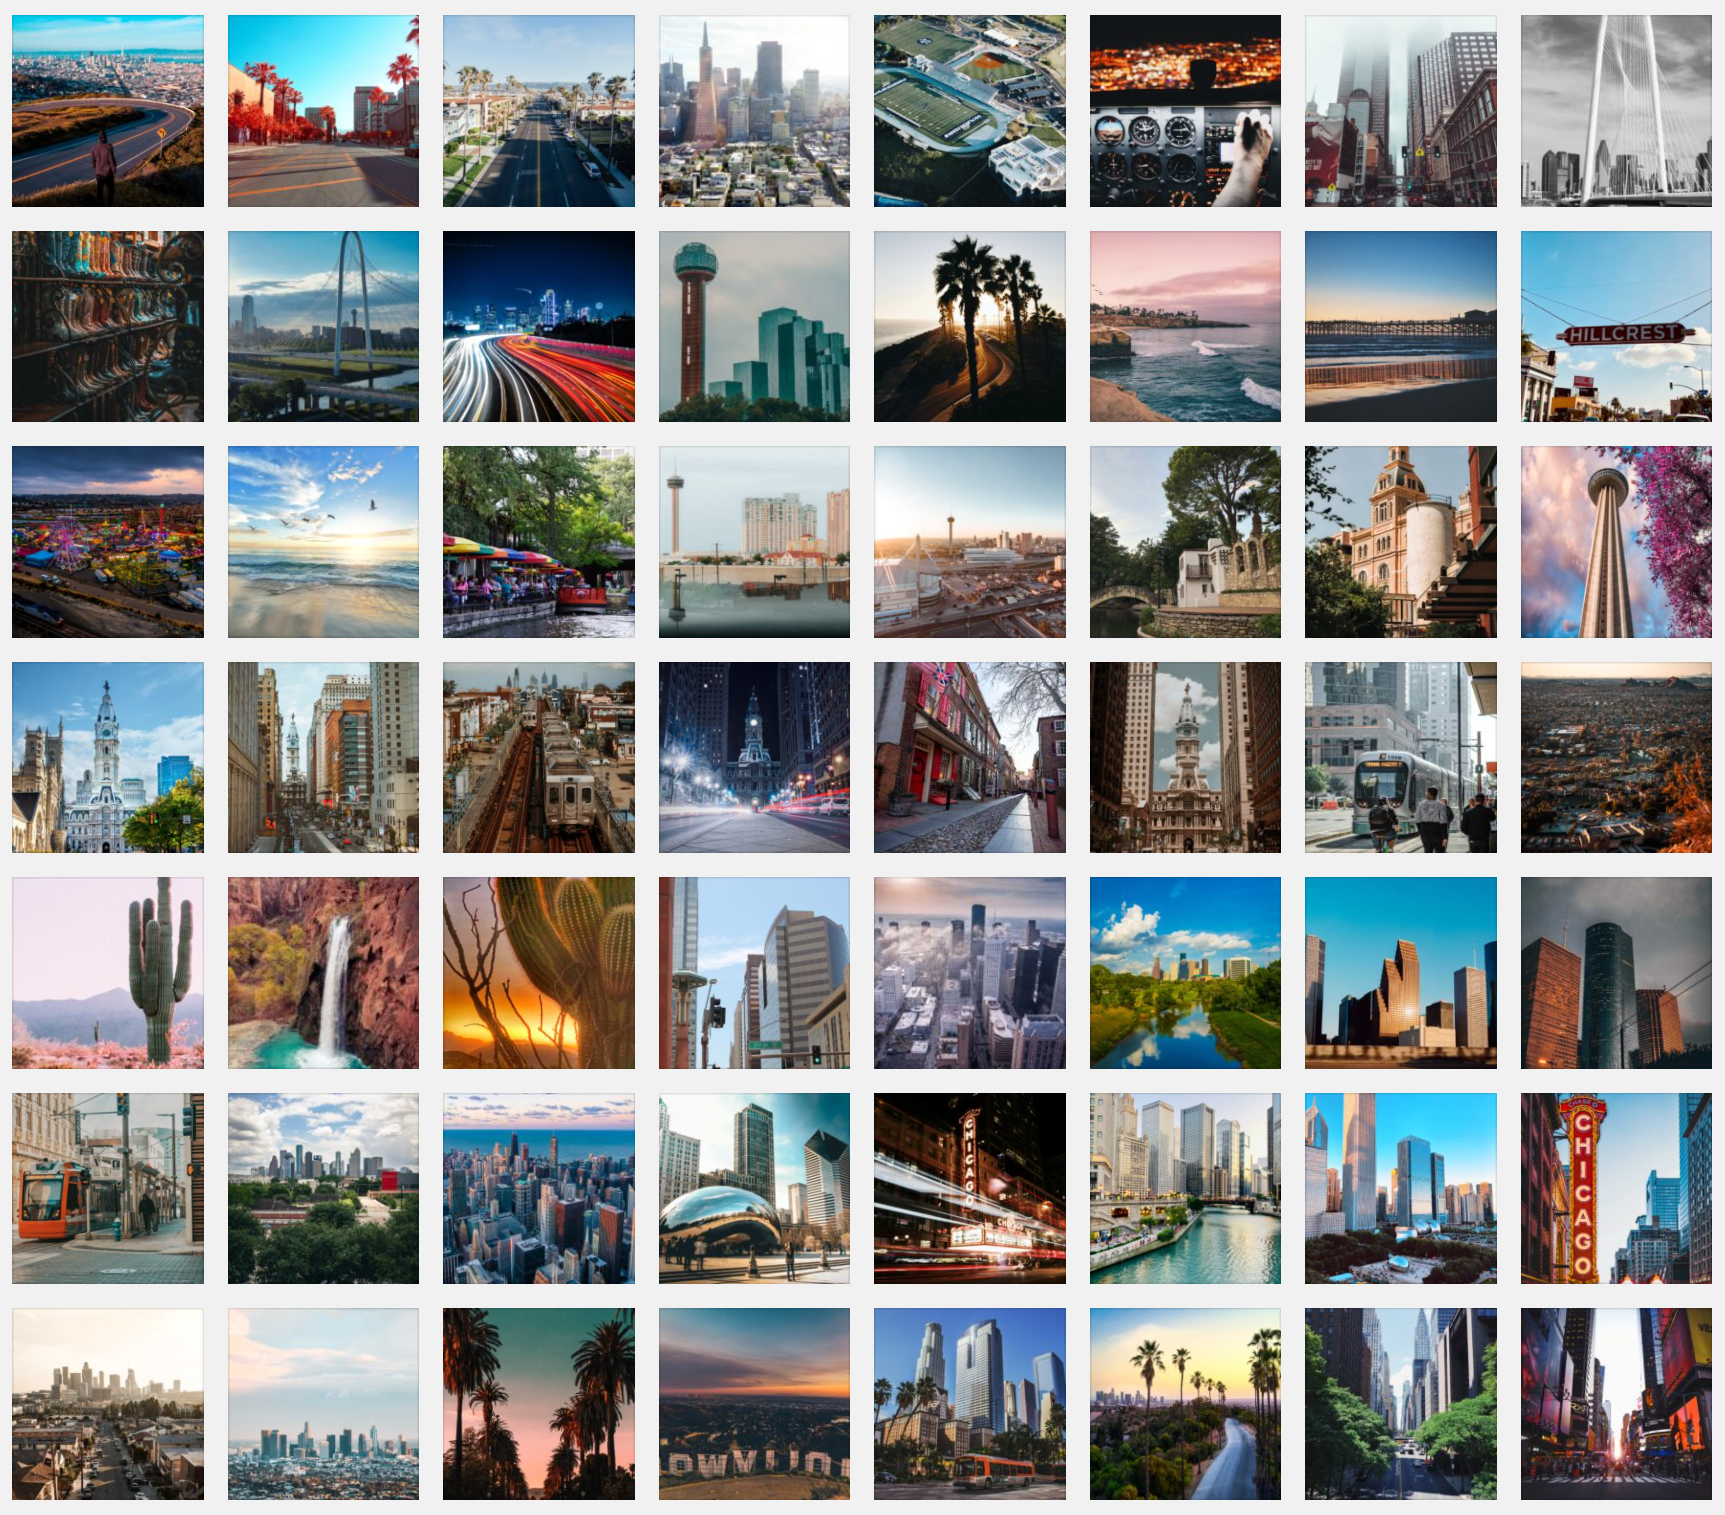 These are the 10 most beautiful American Cities to set as Teams background